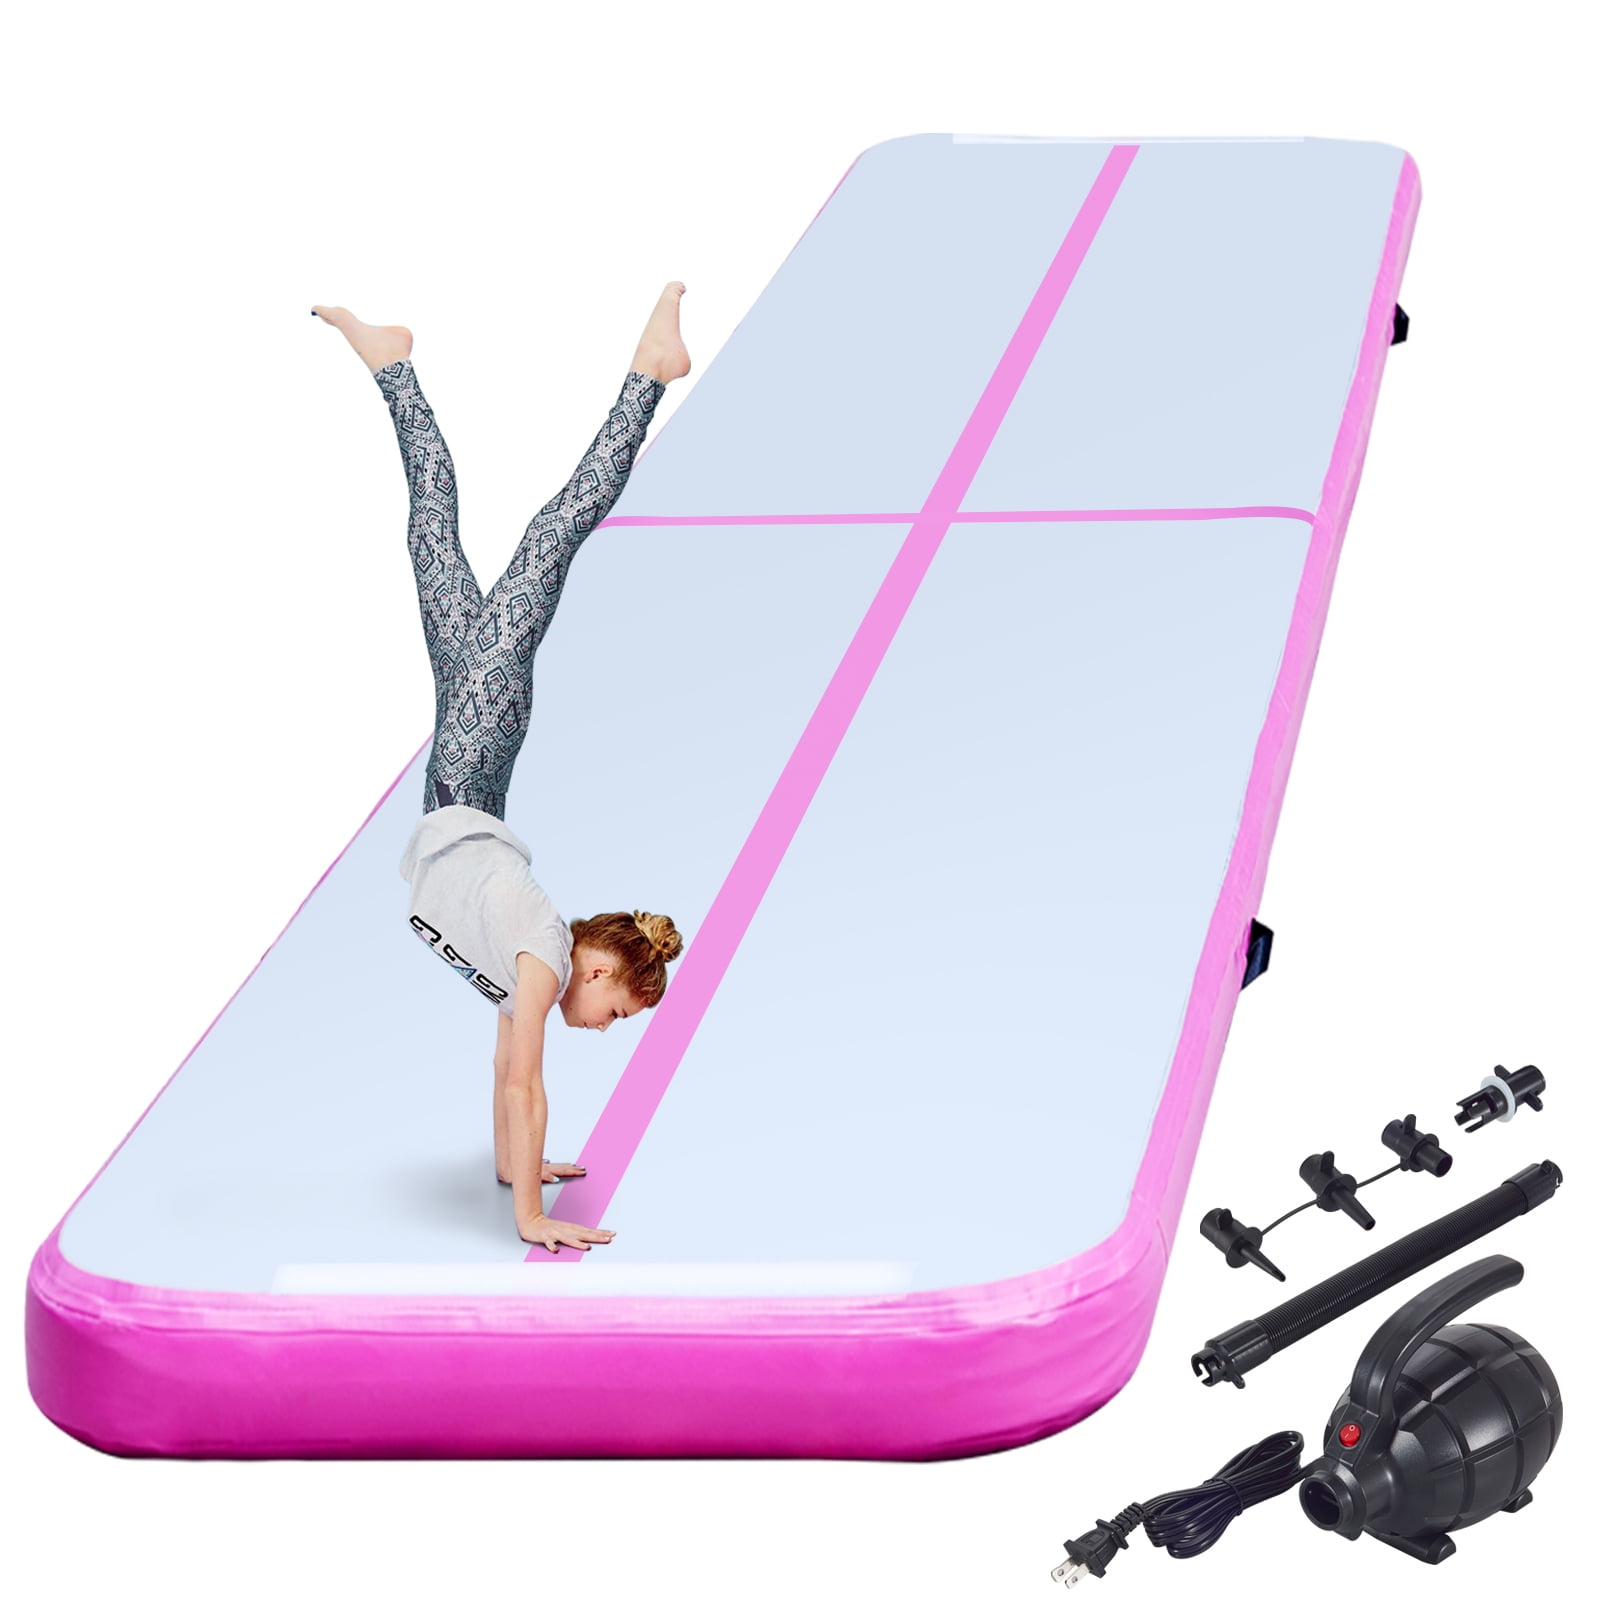 Looking to Buy The Best Outdoor Gymnastic Mats. Here Are 15 Key Things to Consider